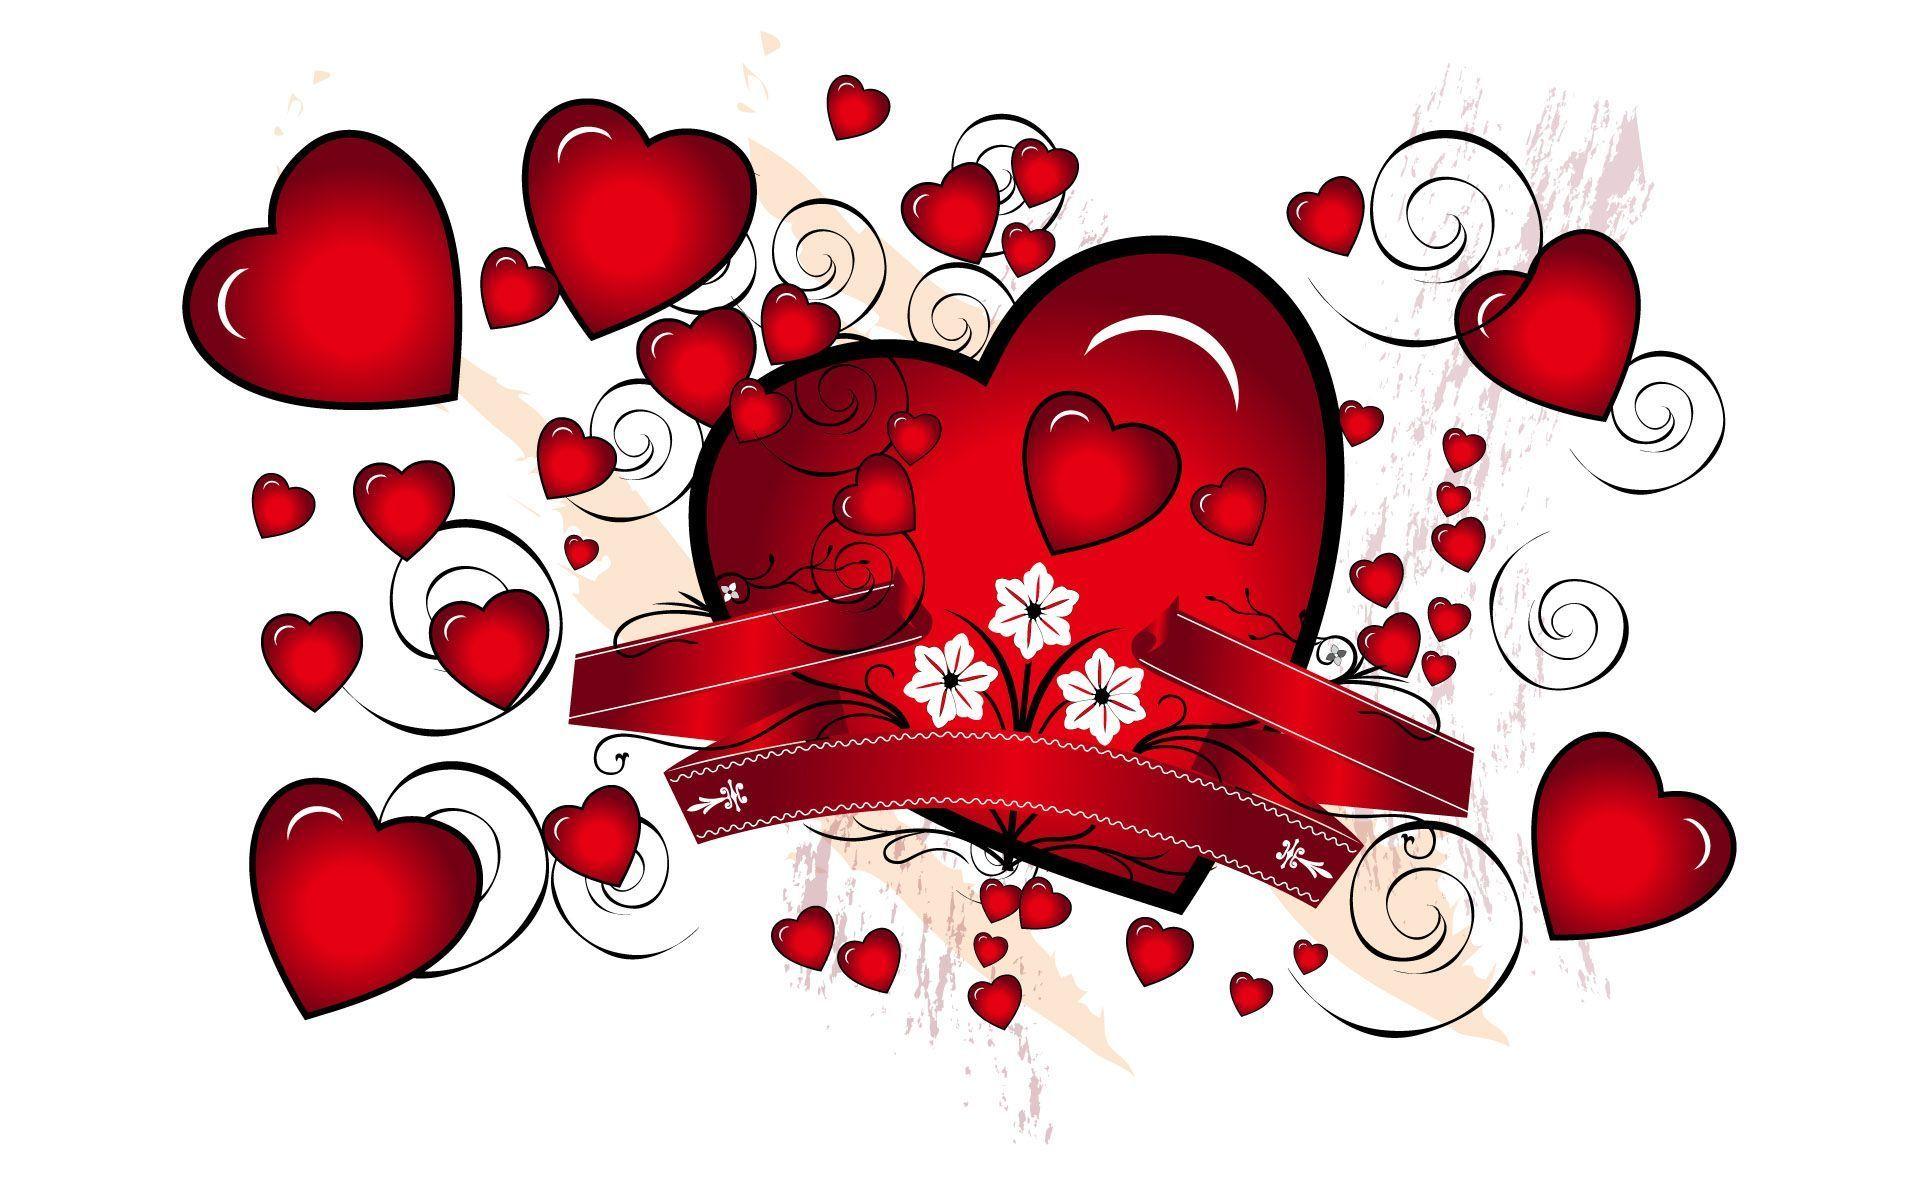 Lonely hearts wallpaper and image, picture, photo